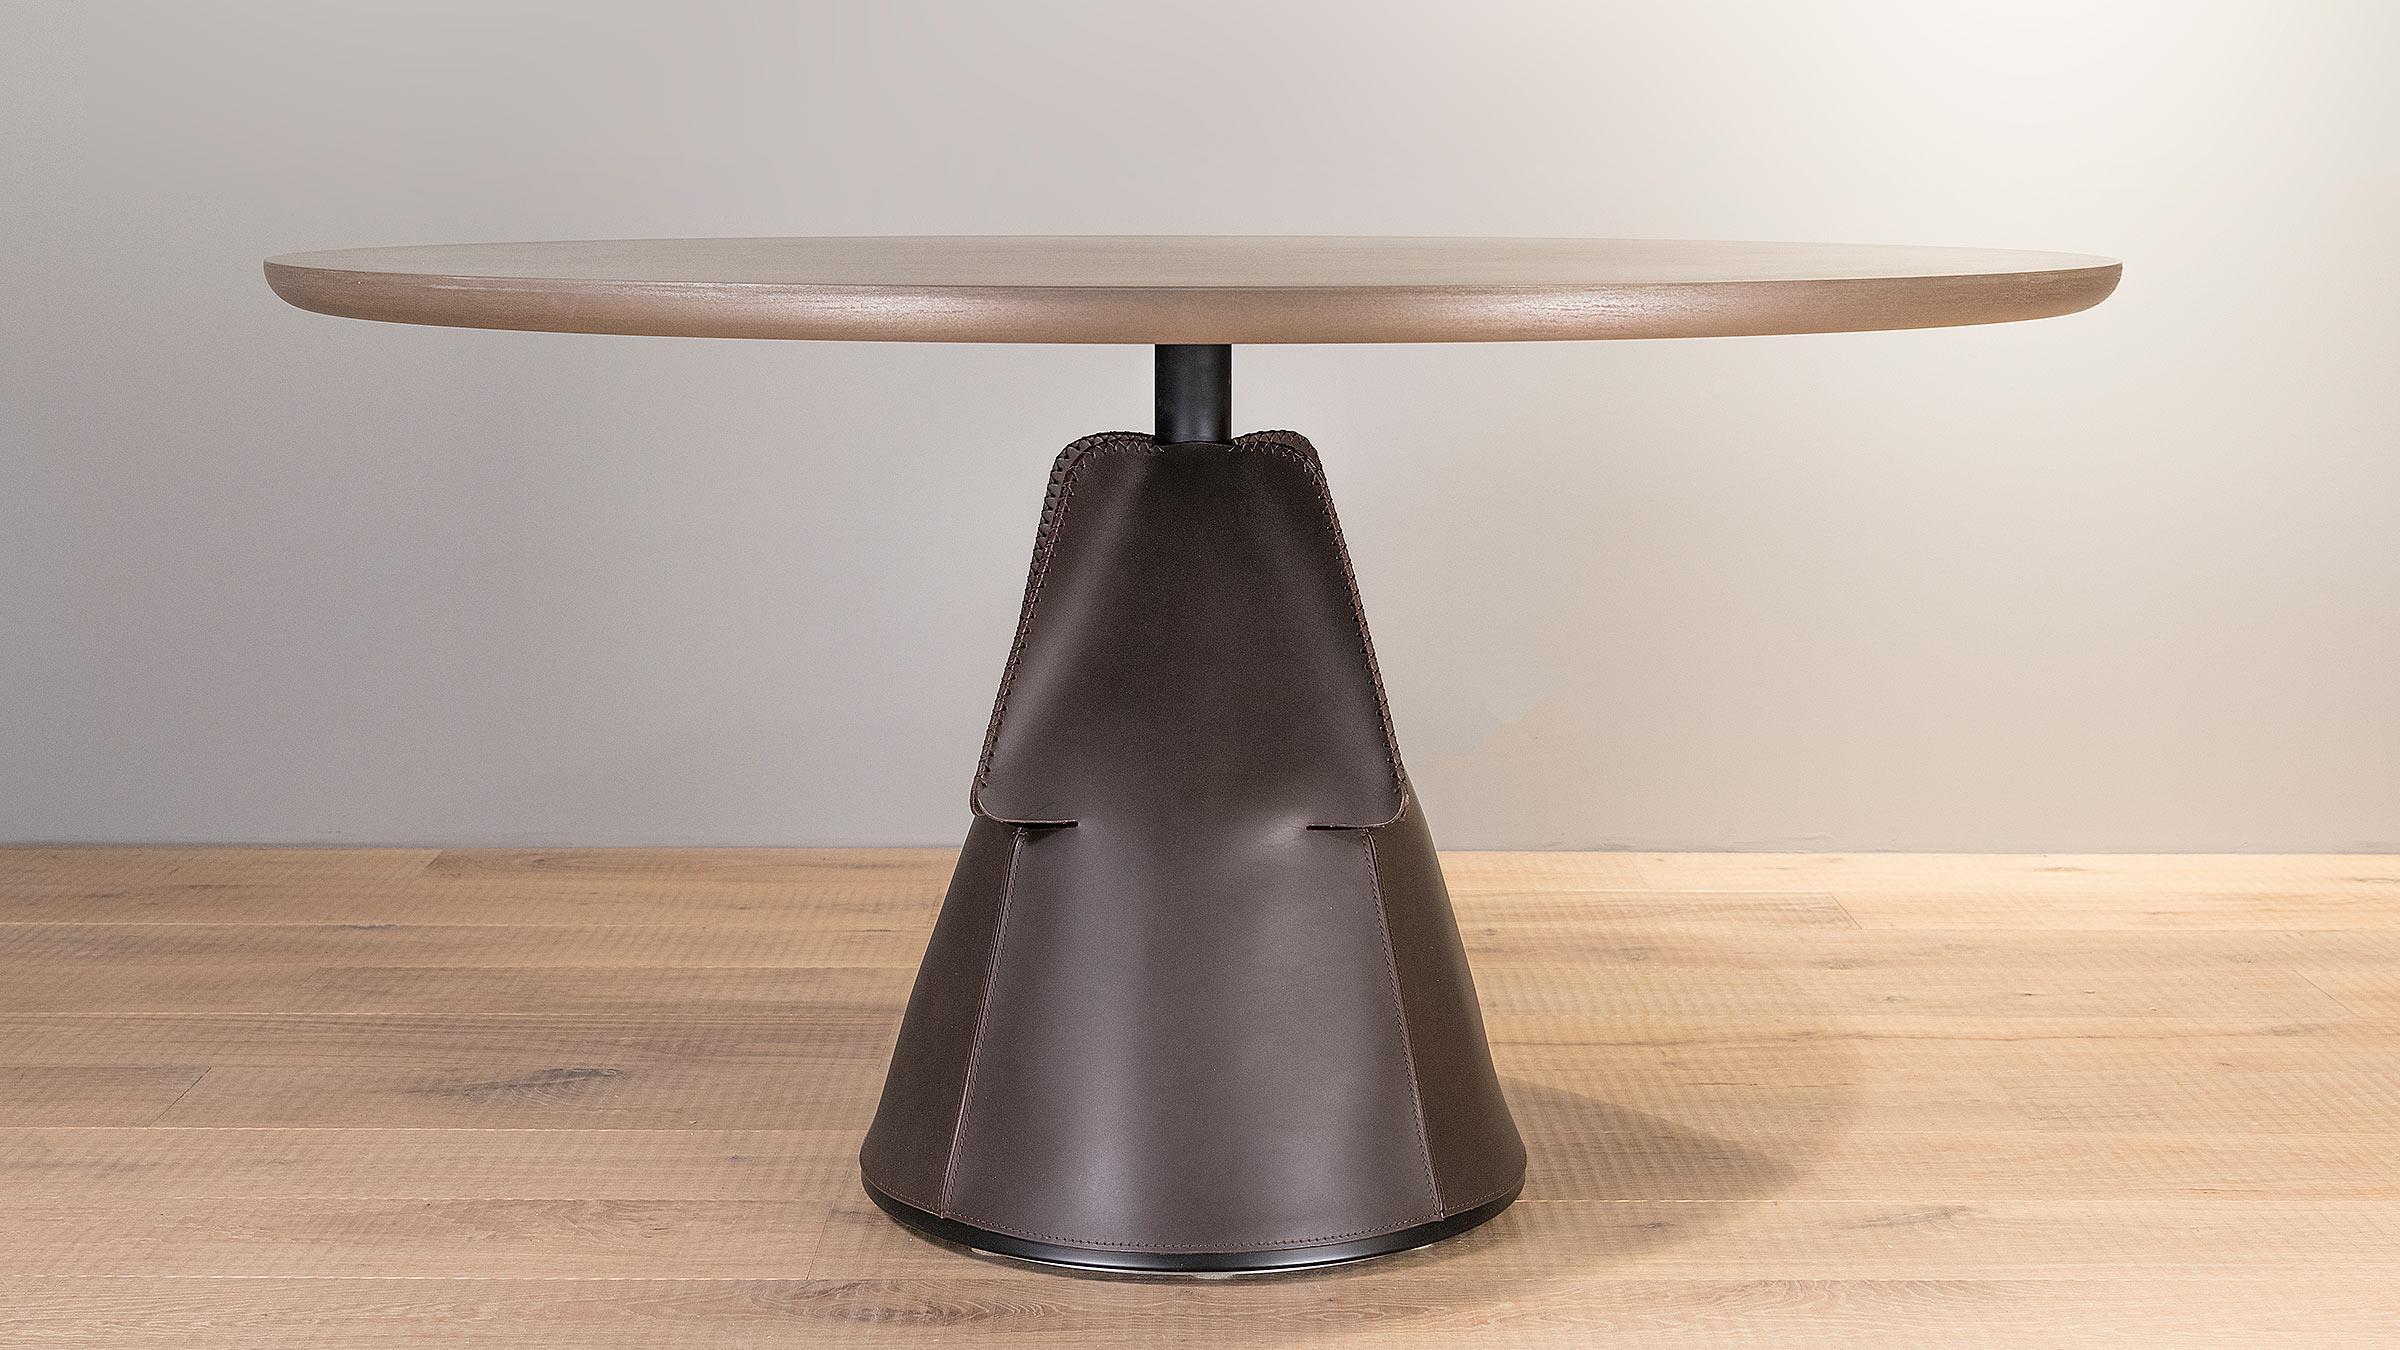 Conical table leg seeks guests. One of the great passions of our master craftsmen is to experiment with leather as a material, always treading new paths. In the case of DS-615, they deserve all the accolades: they managed to take the idea of